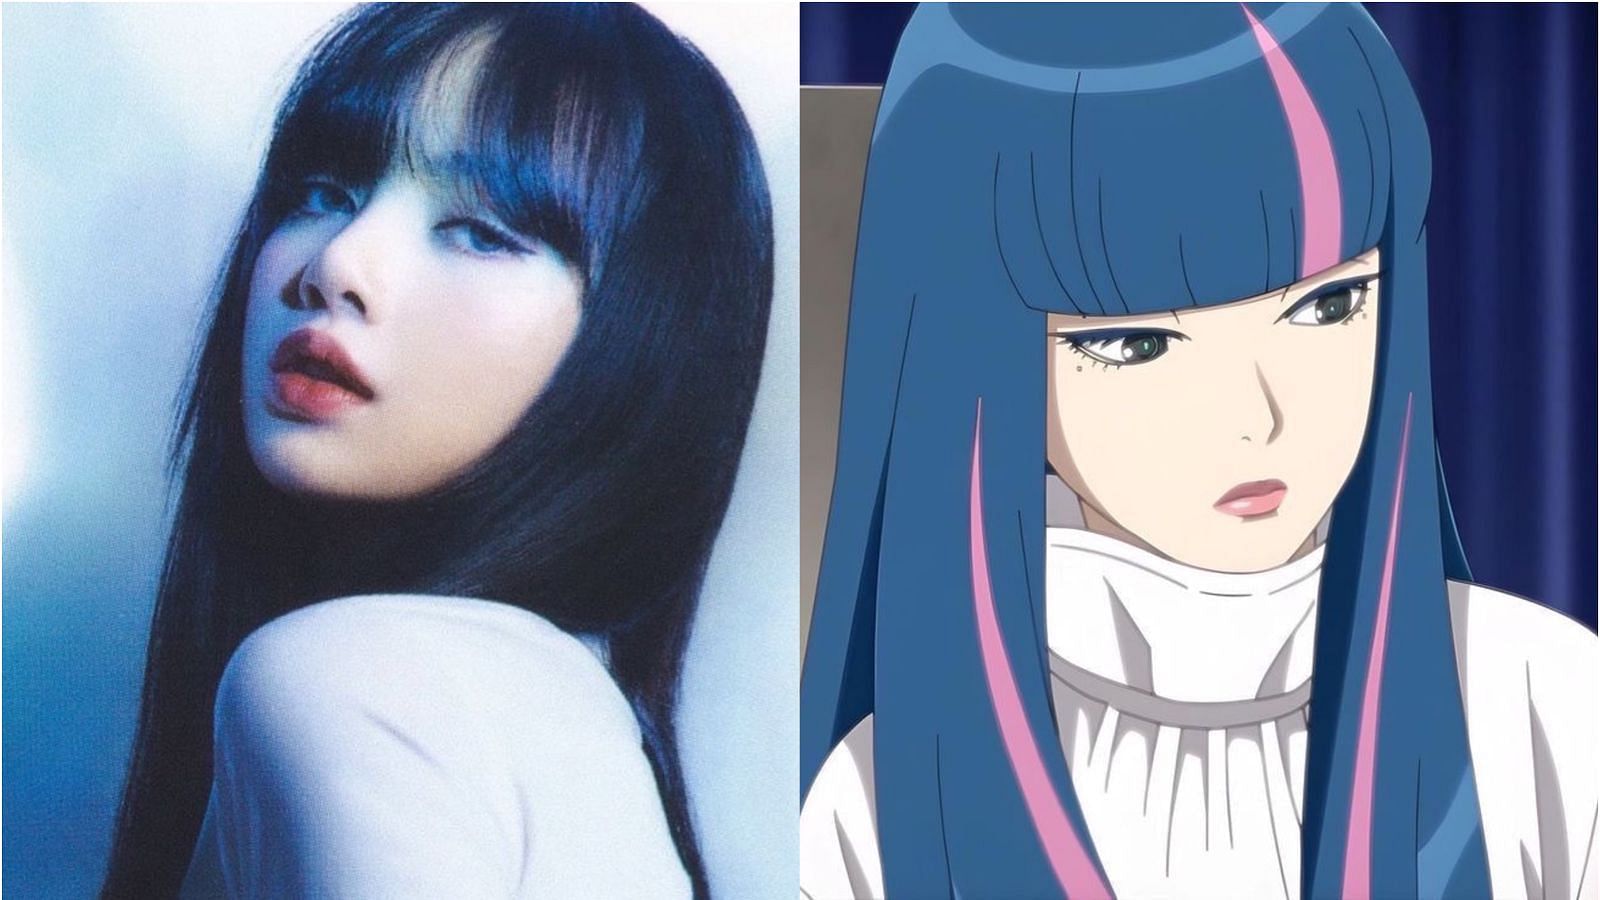 Using Artificial Intelligence This Artist Recreated Anime And Video Game  Characters To See What They Would Look Like In Reality 35 Pics  Bored  Panda